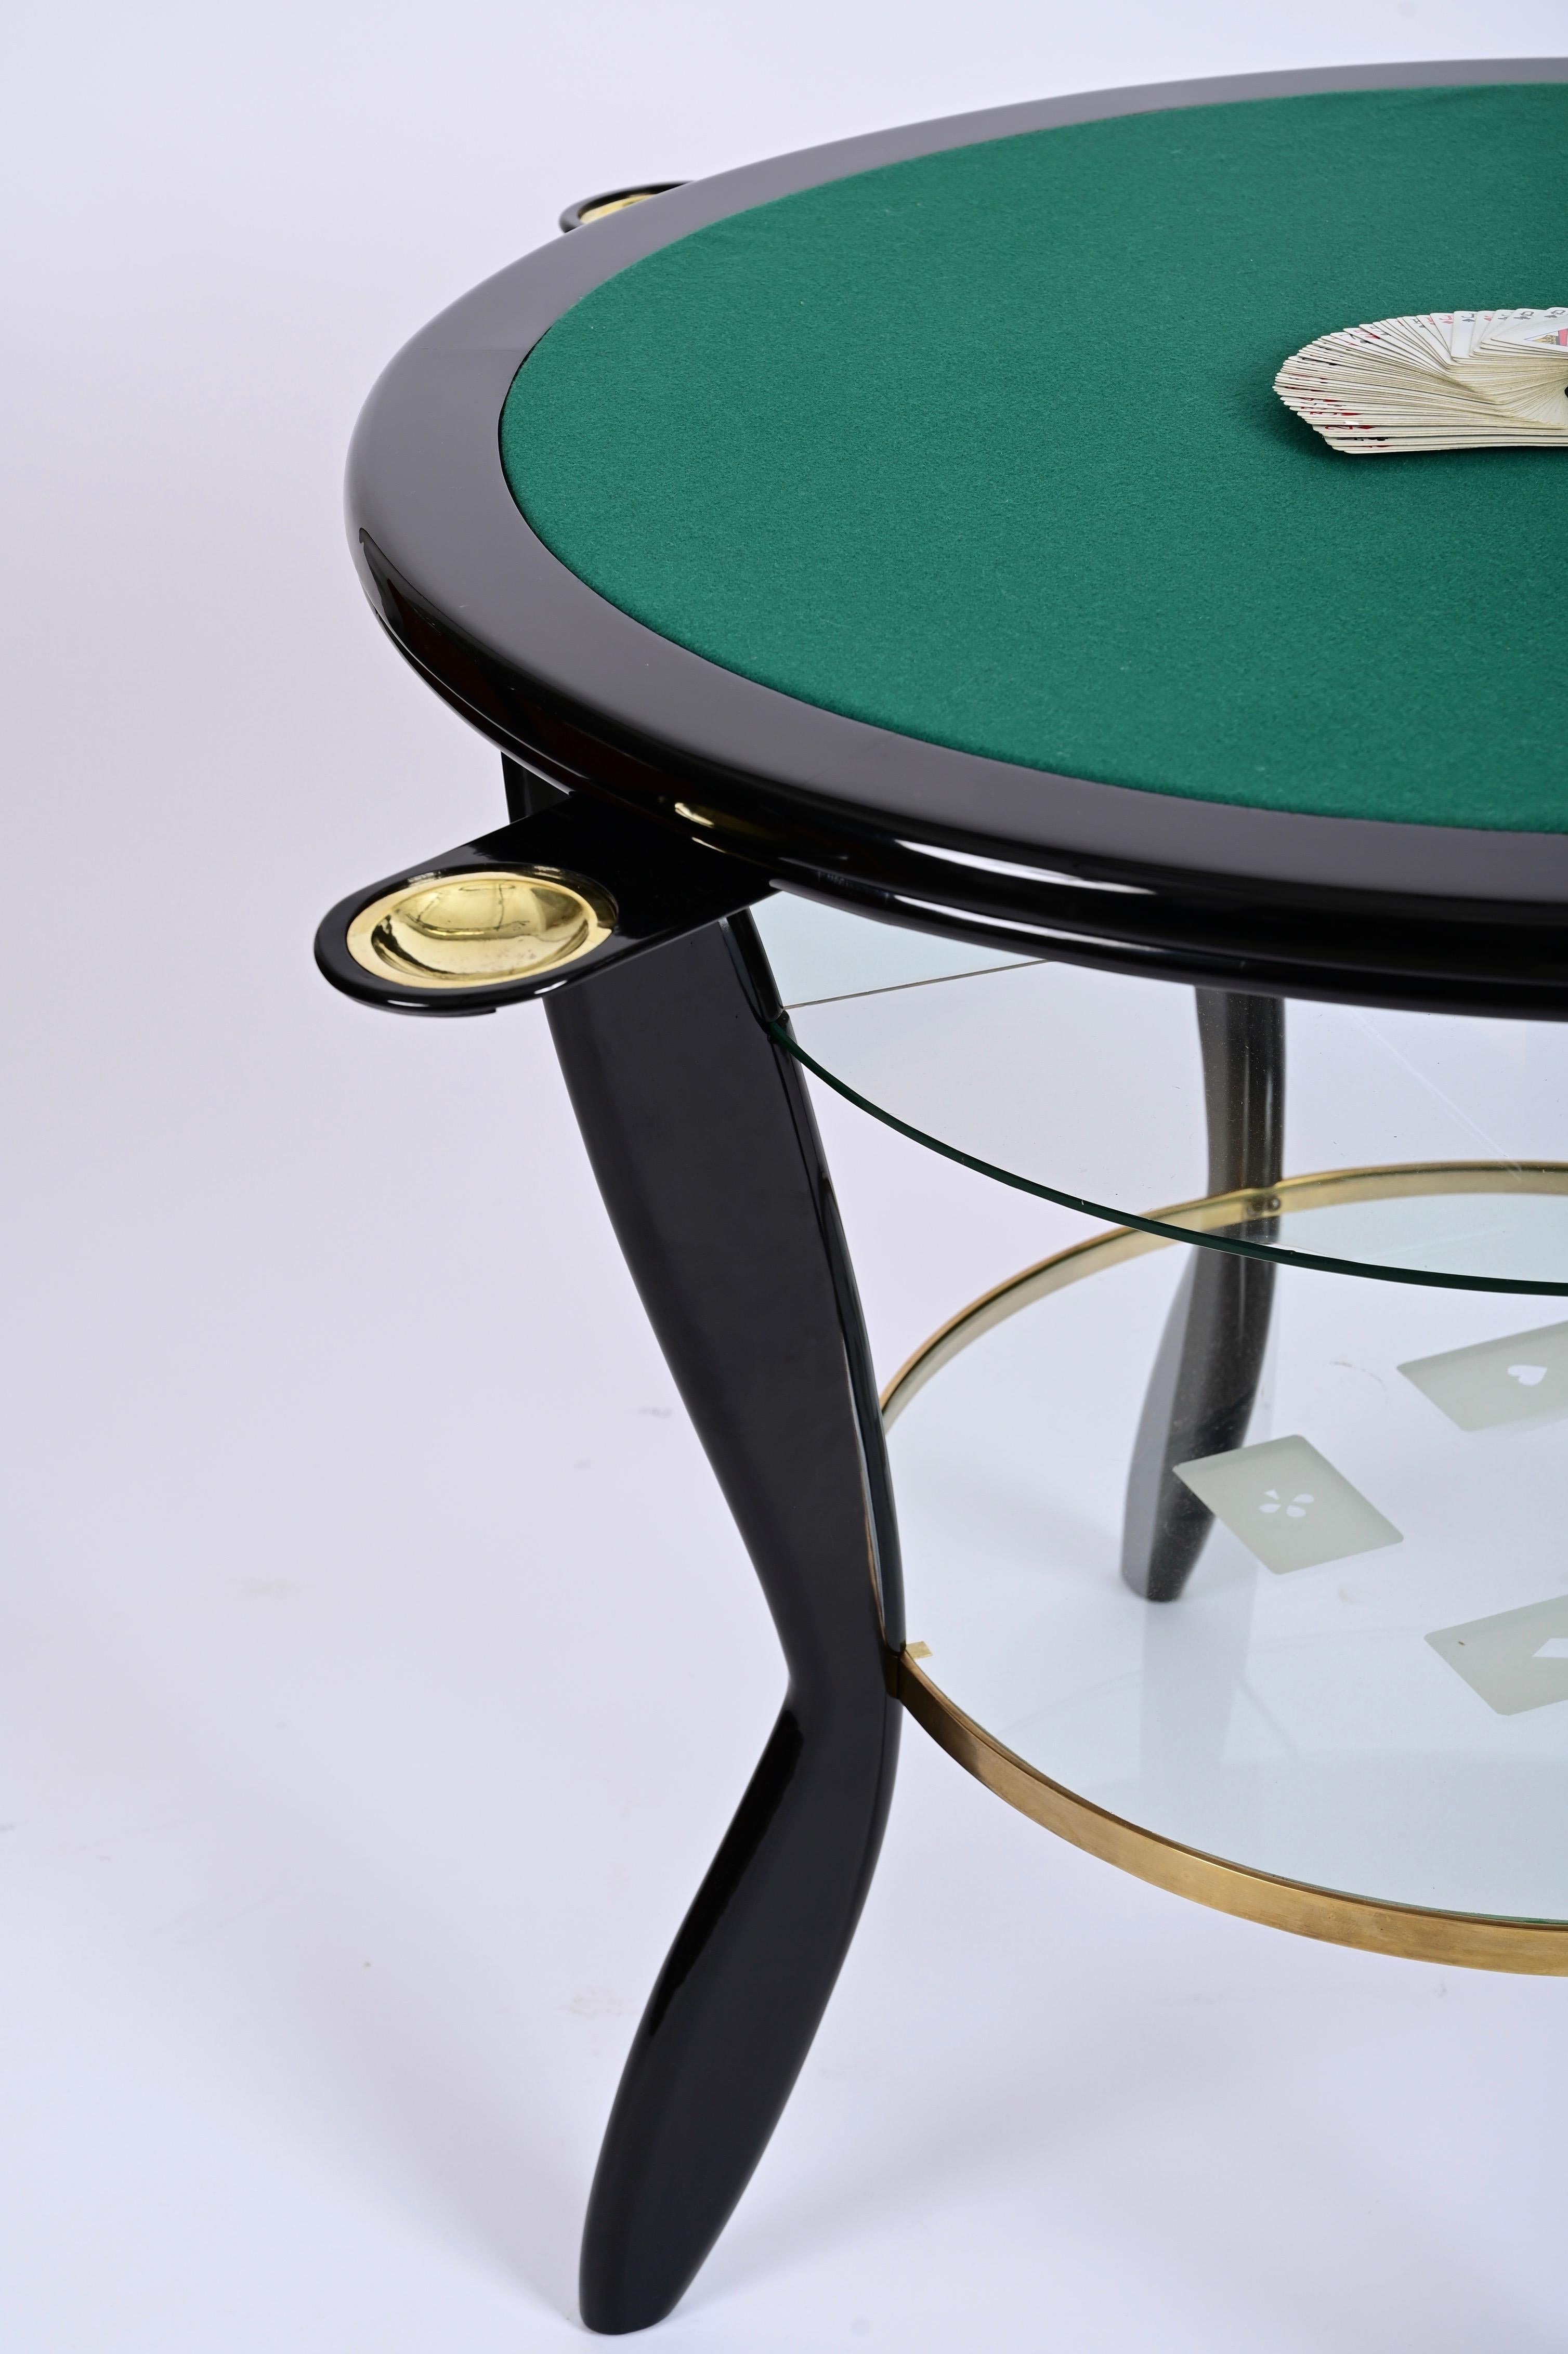 Gio Ponti Style Ebonized Beech and Brass Italian Game Table with Glass, 1950s For Sale 11